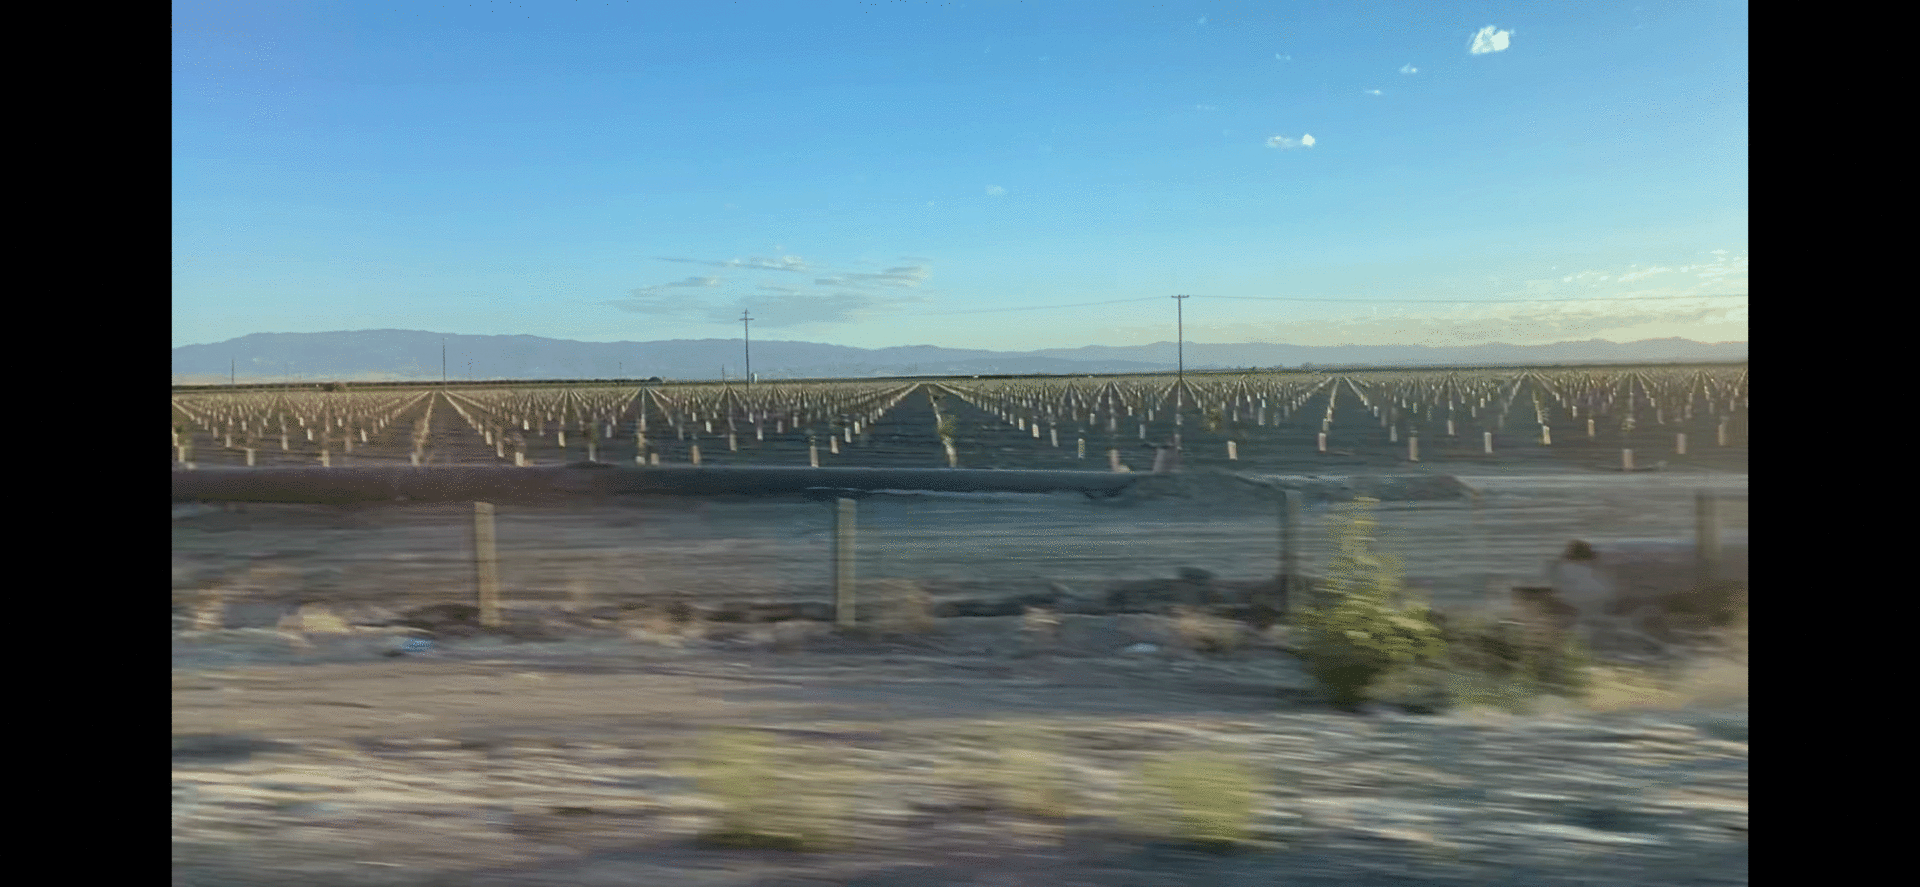 Moving Image of crop rows from the view of a passenger in a car.